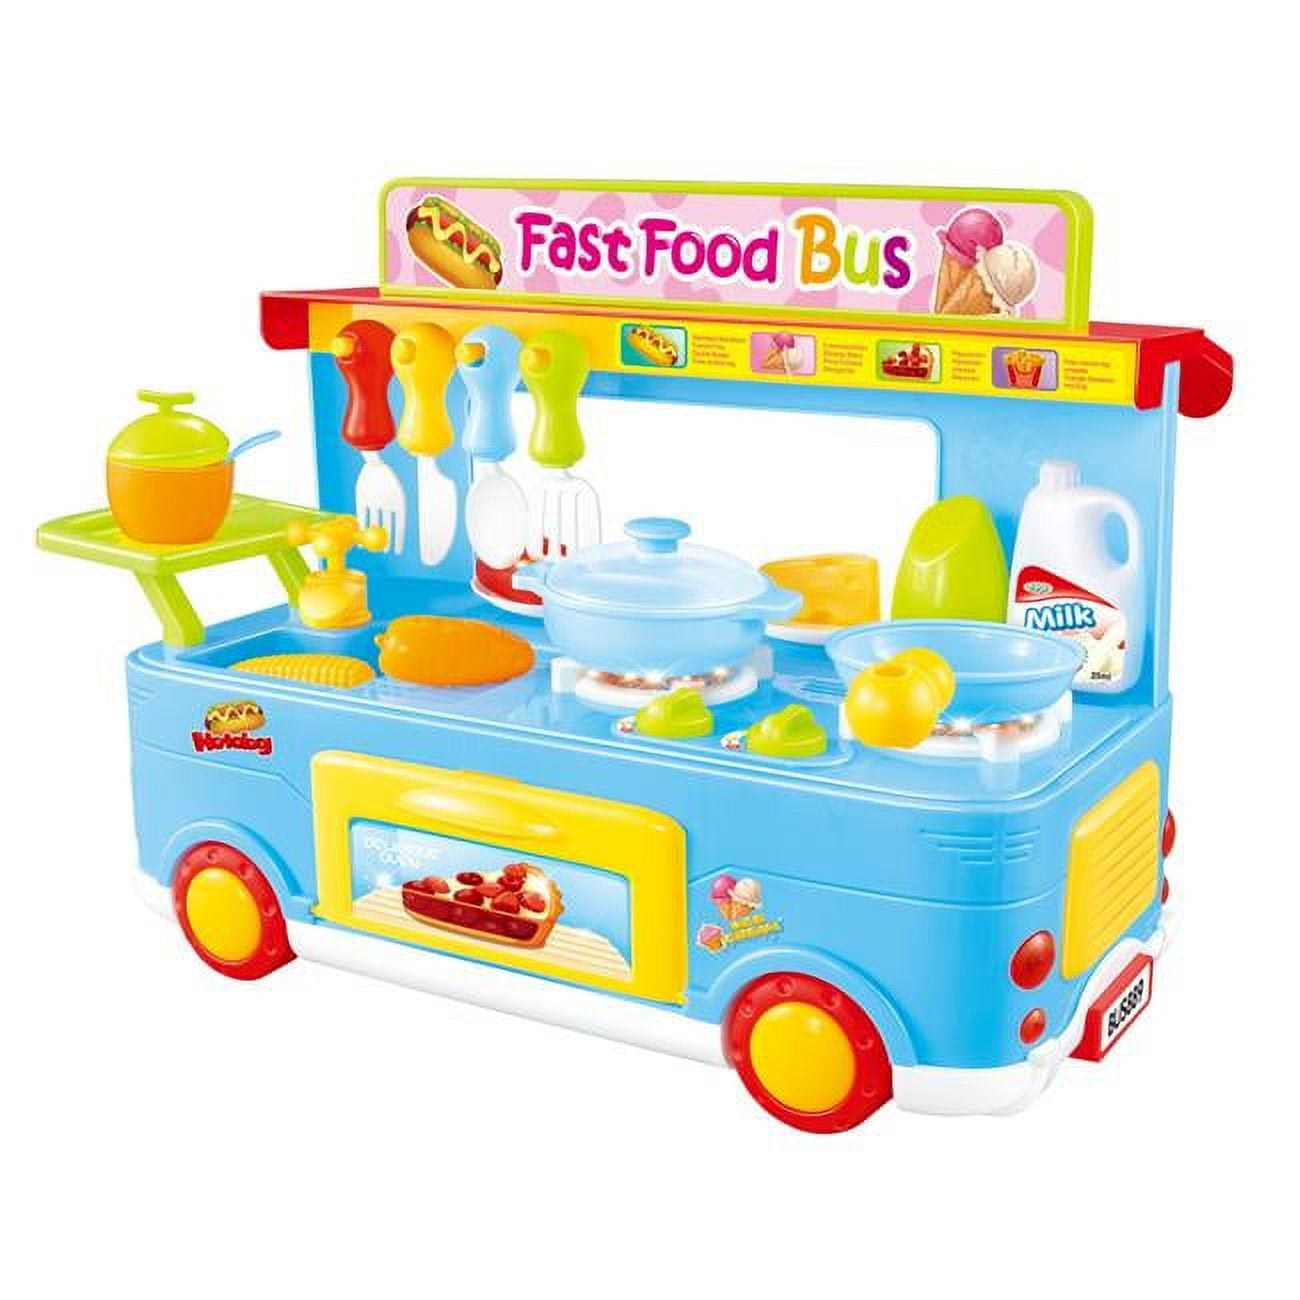 Ps8807 Fast Food Bus Kitchen Play Set Toy, Blue - 29 Piece